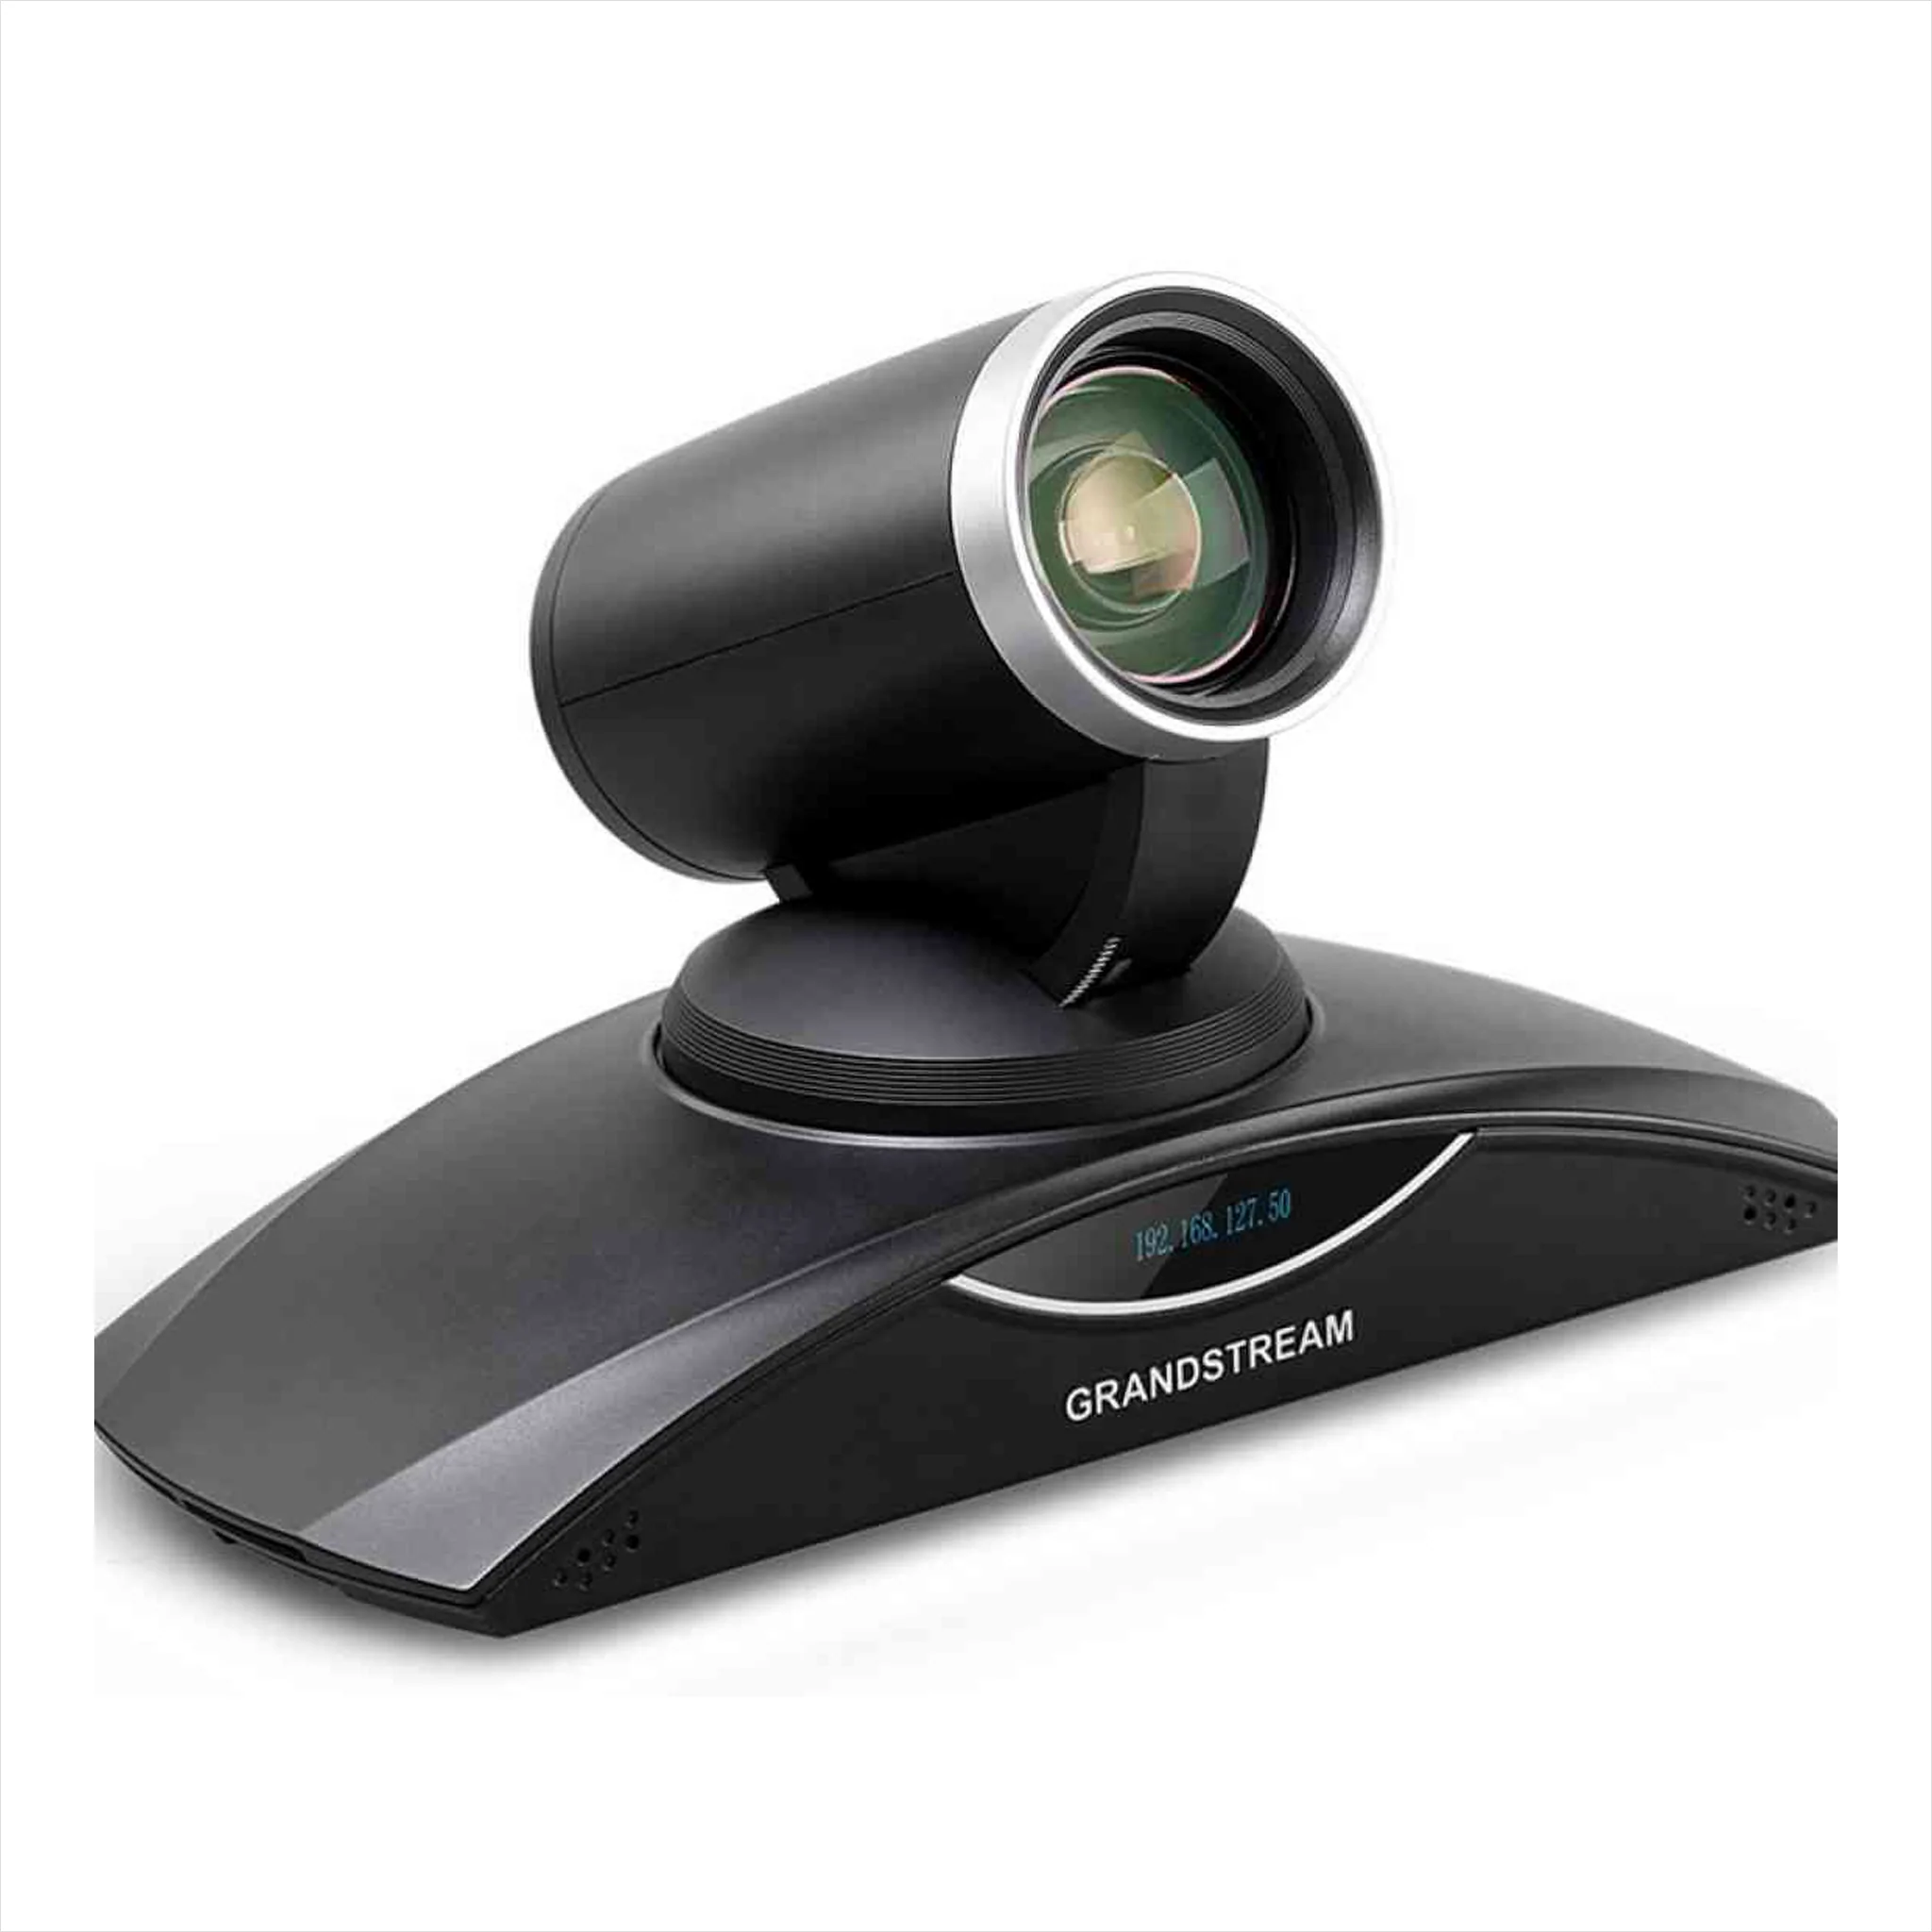 Grandstream GVC3202 Full HD Video Conferencing System right